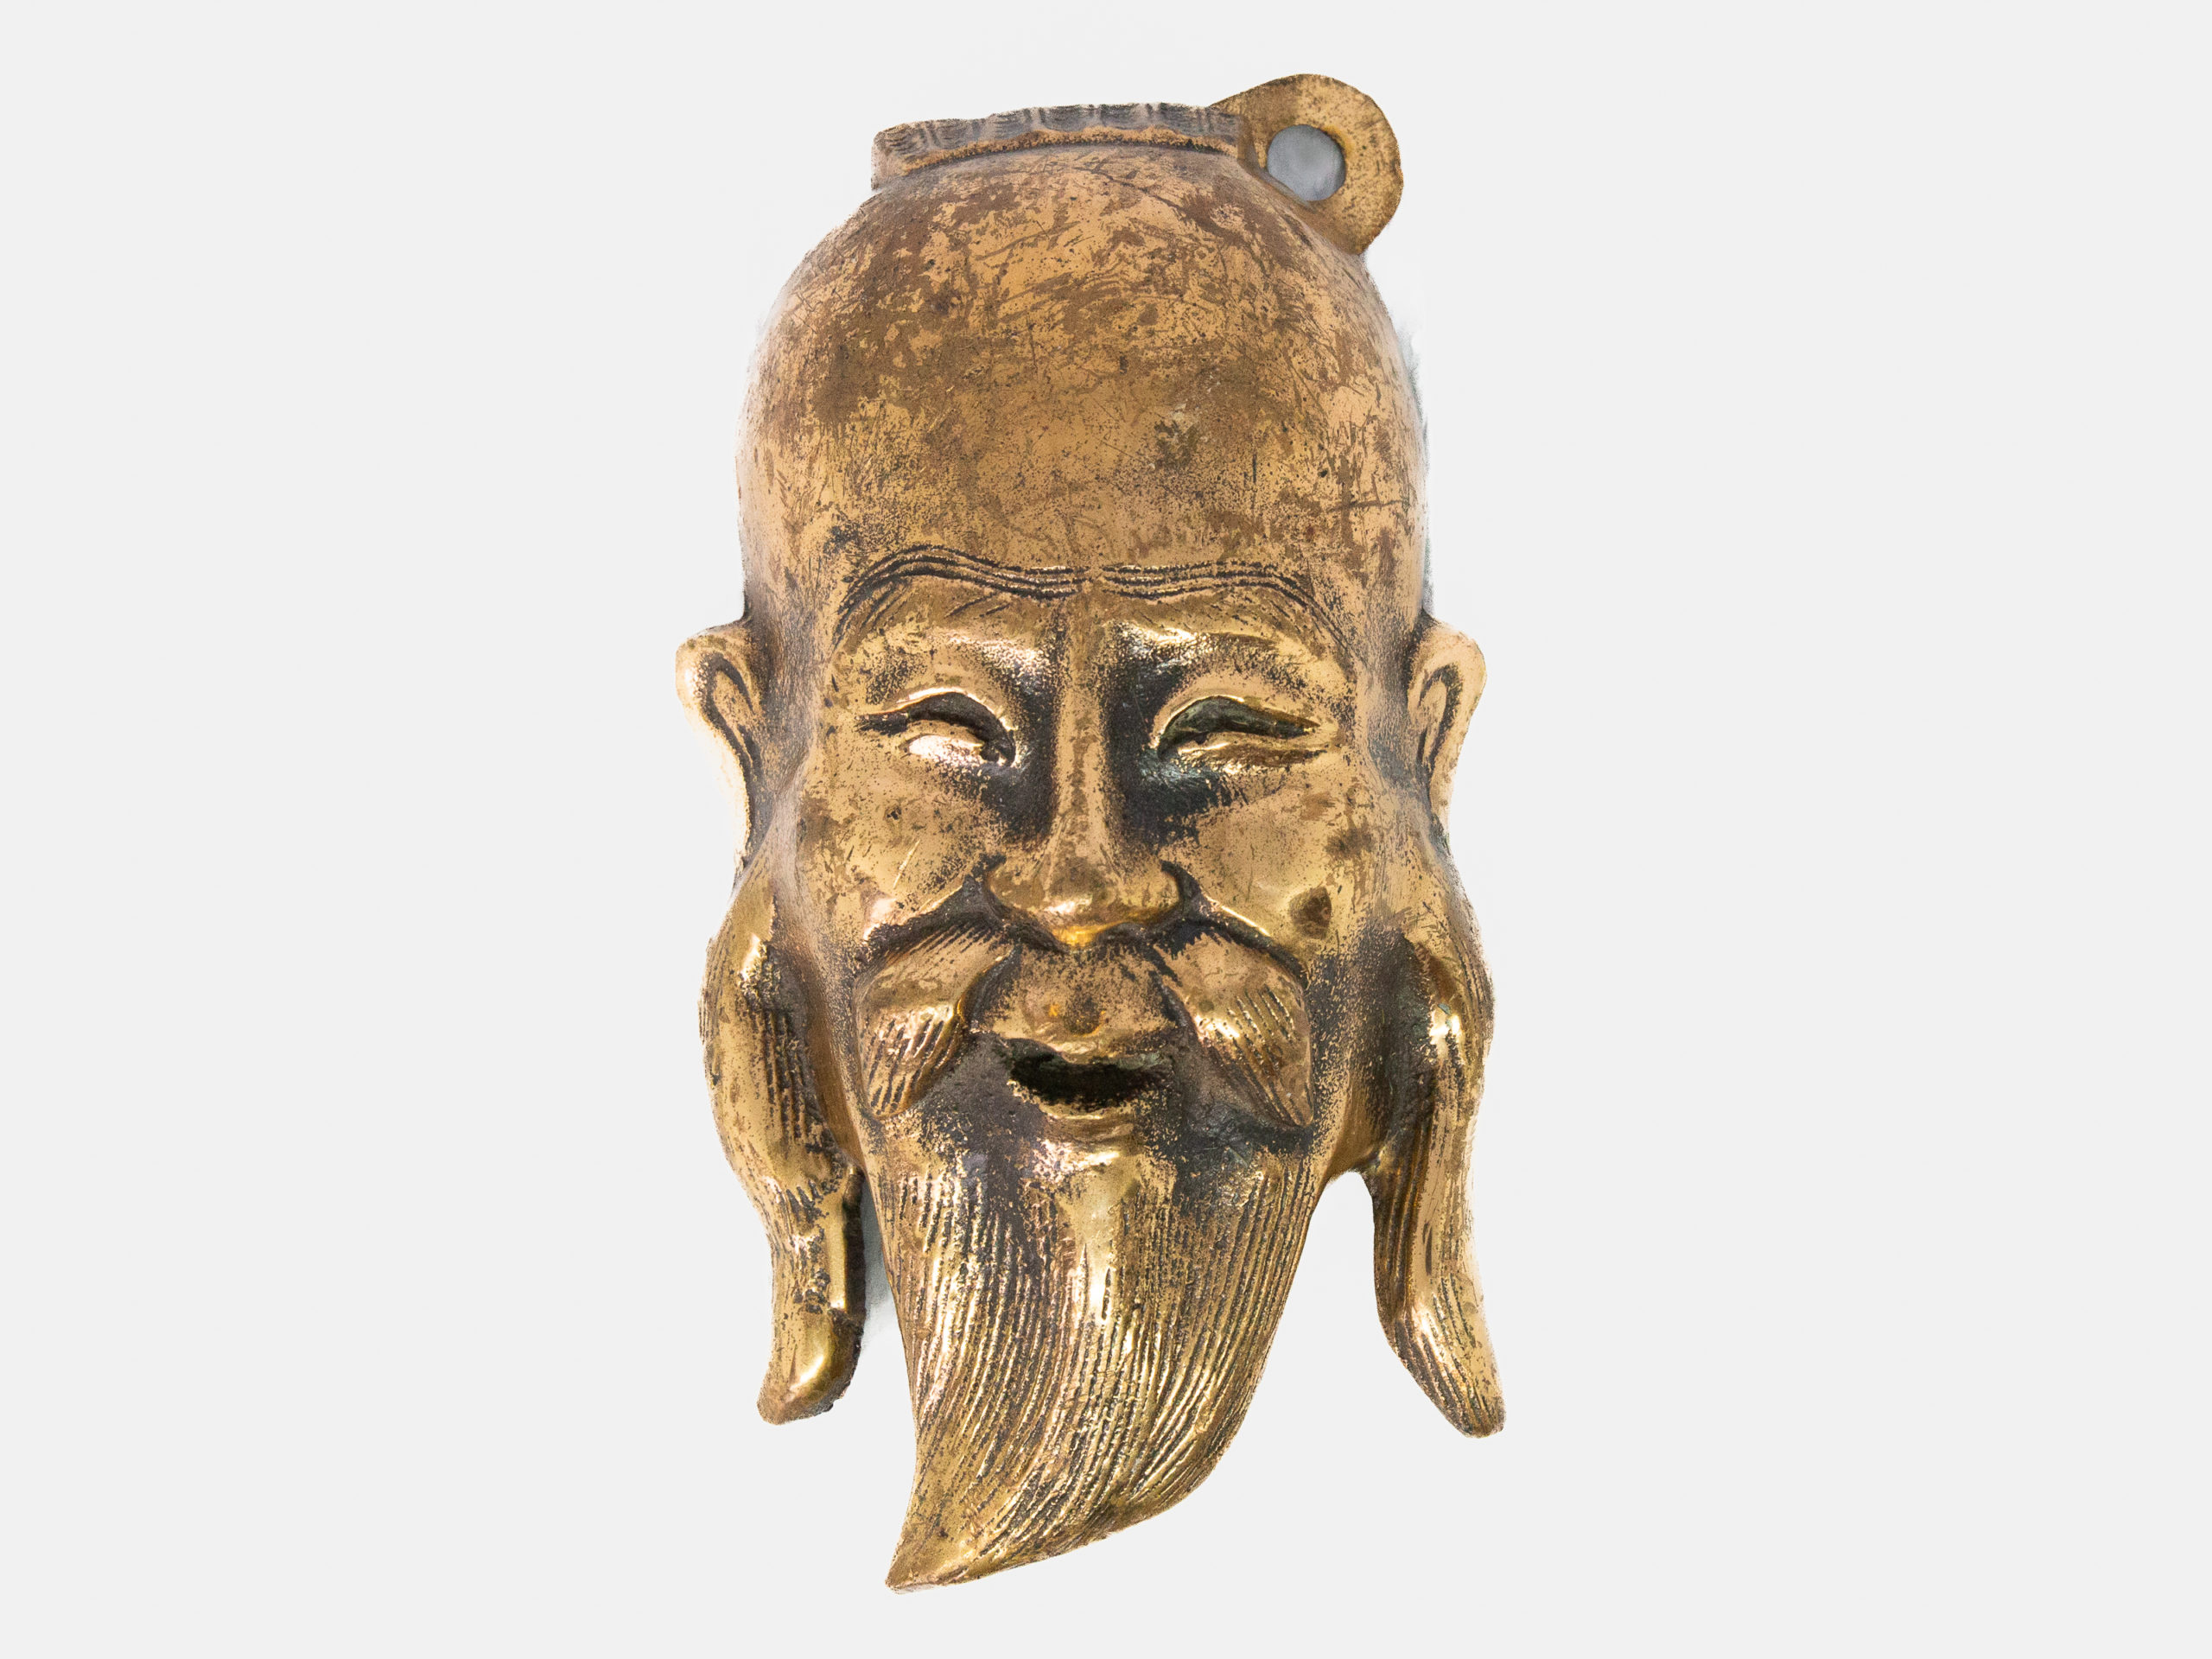 19th century Chinese bronze head. A very heavy and well made bronze head of a Chinese man (possibly deity Shou or Juroujin) in a brass finish. No markings. Attachment for hanging attached. Drop length 185mm. Main photo of the head laid out on a flat surface and show right way up.